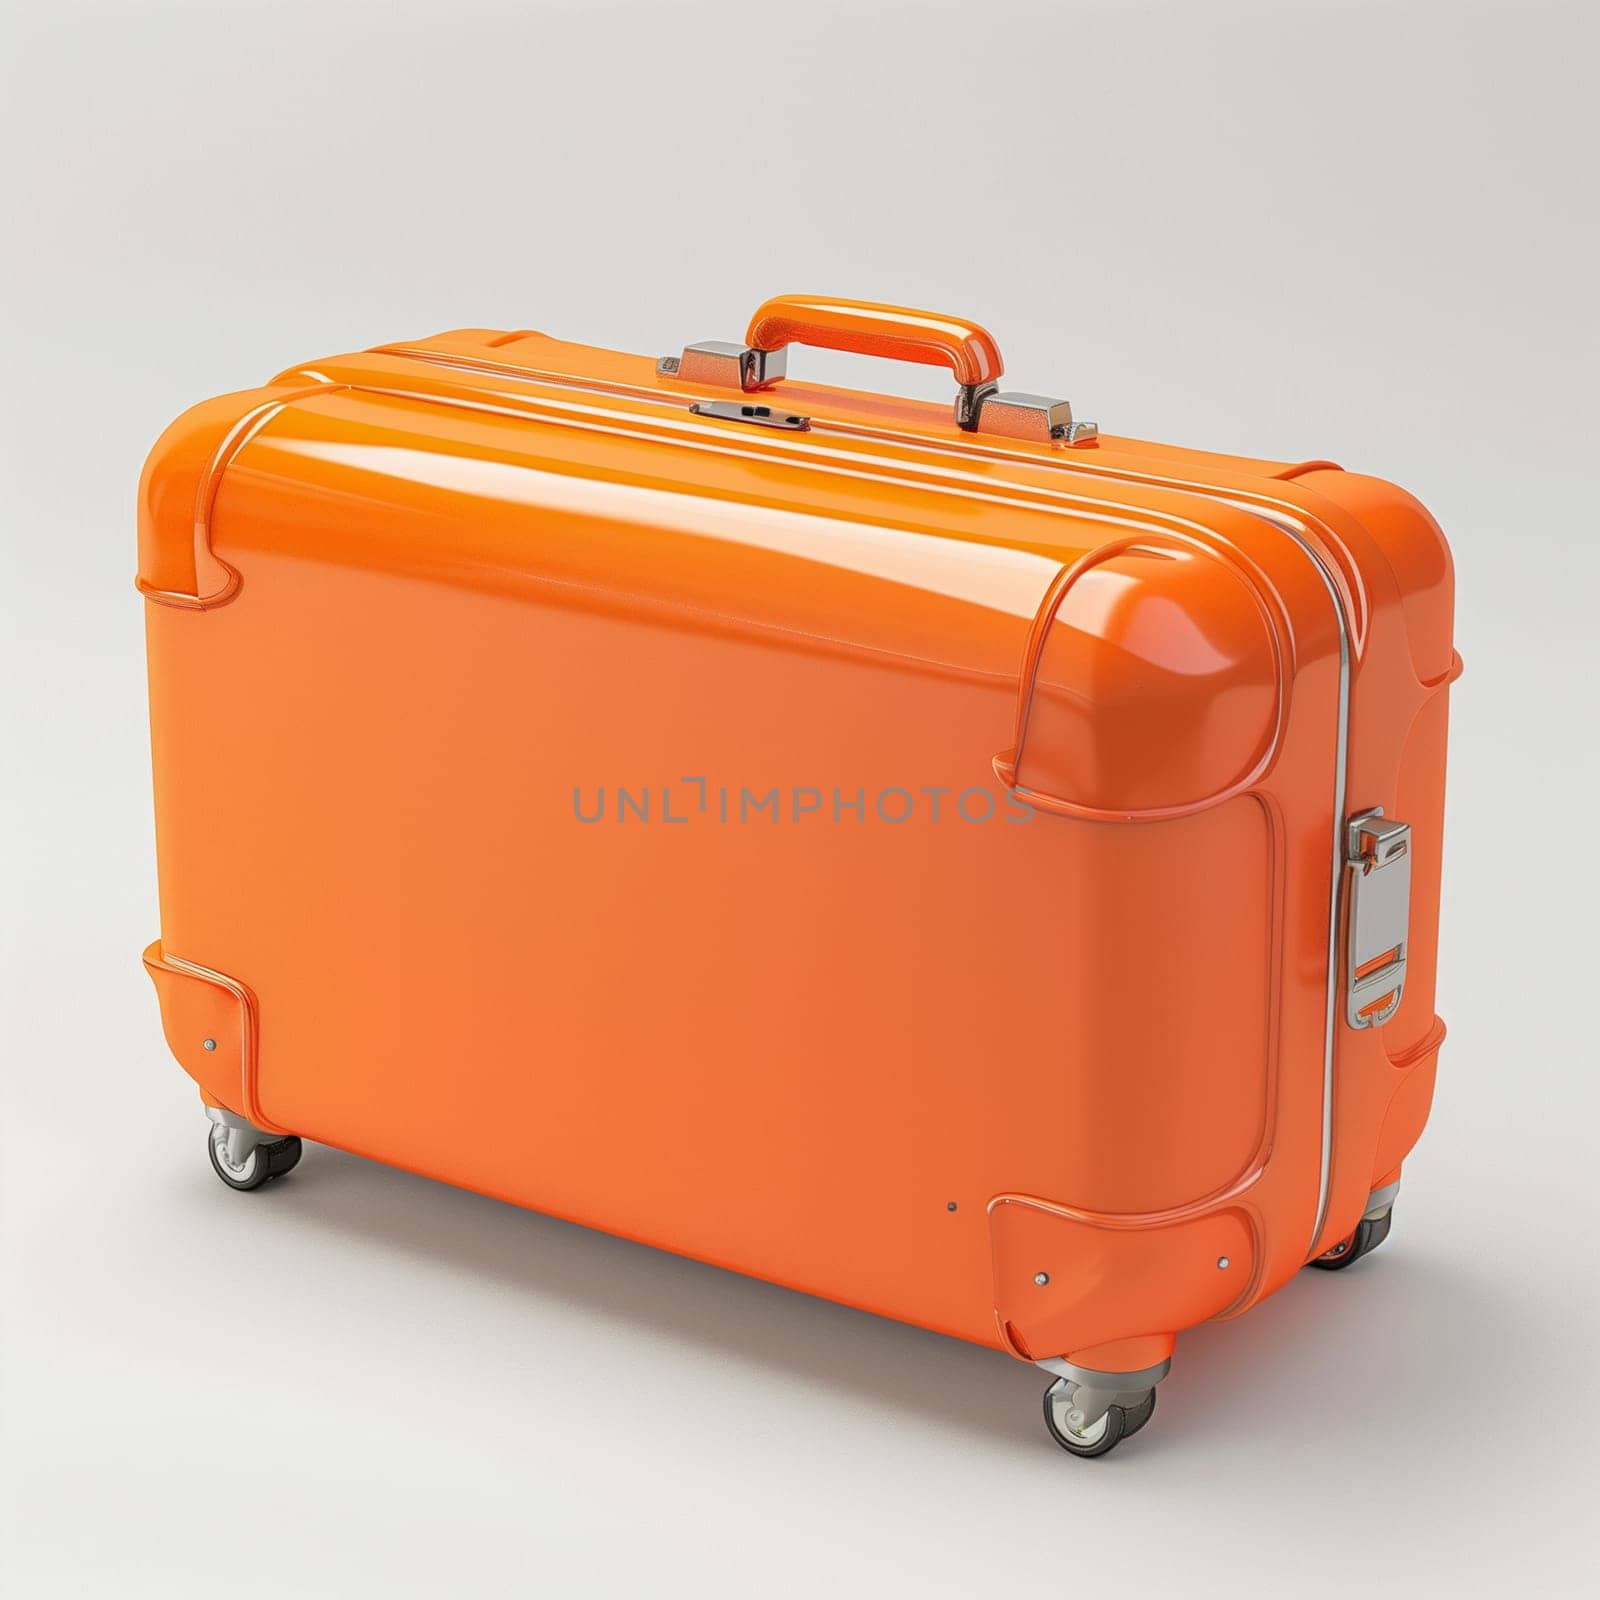 An orange suitcase sits on a clean white floor in a simple interior setting.